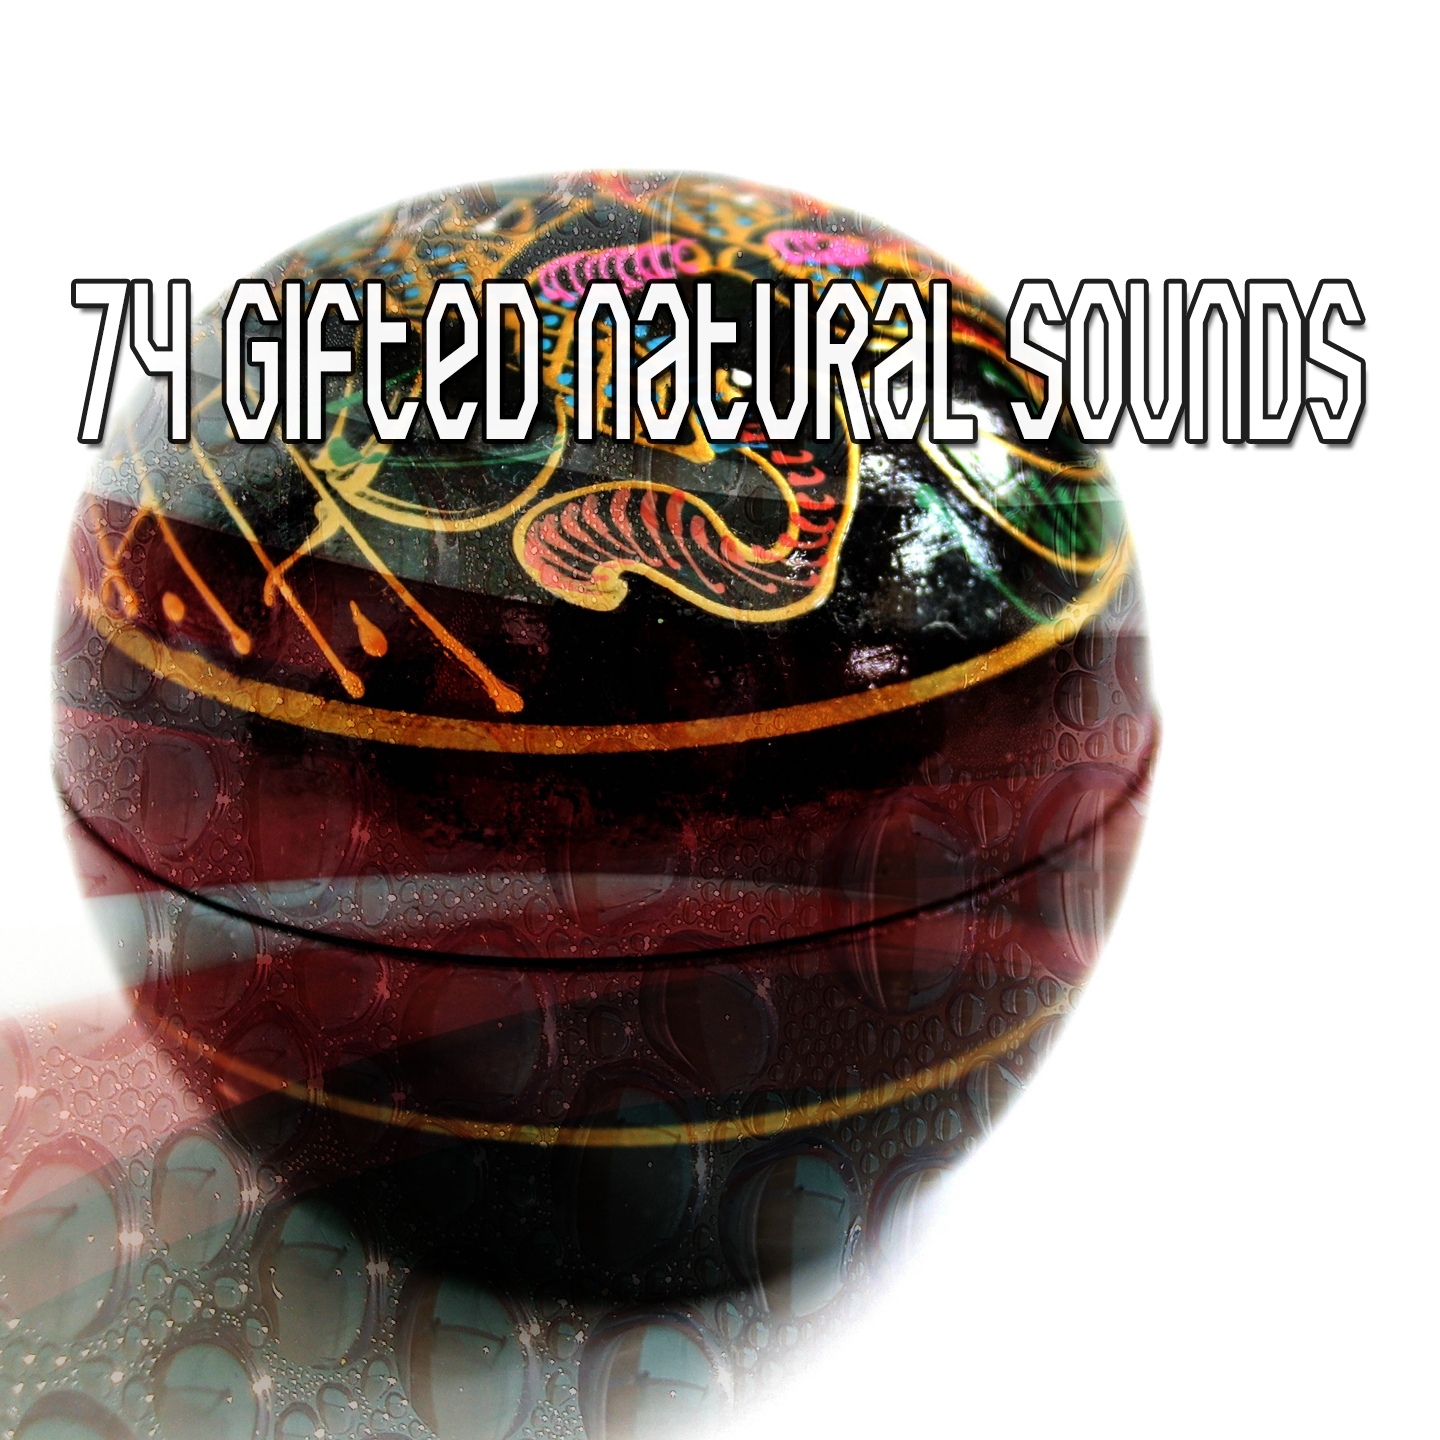 74 Gifted Natural Sounds